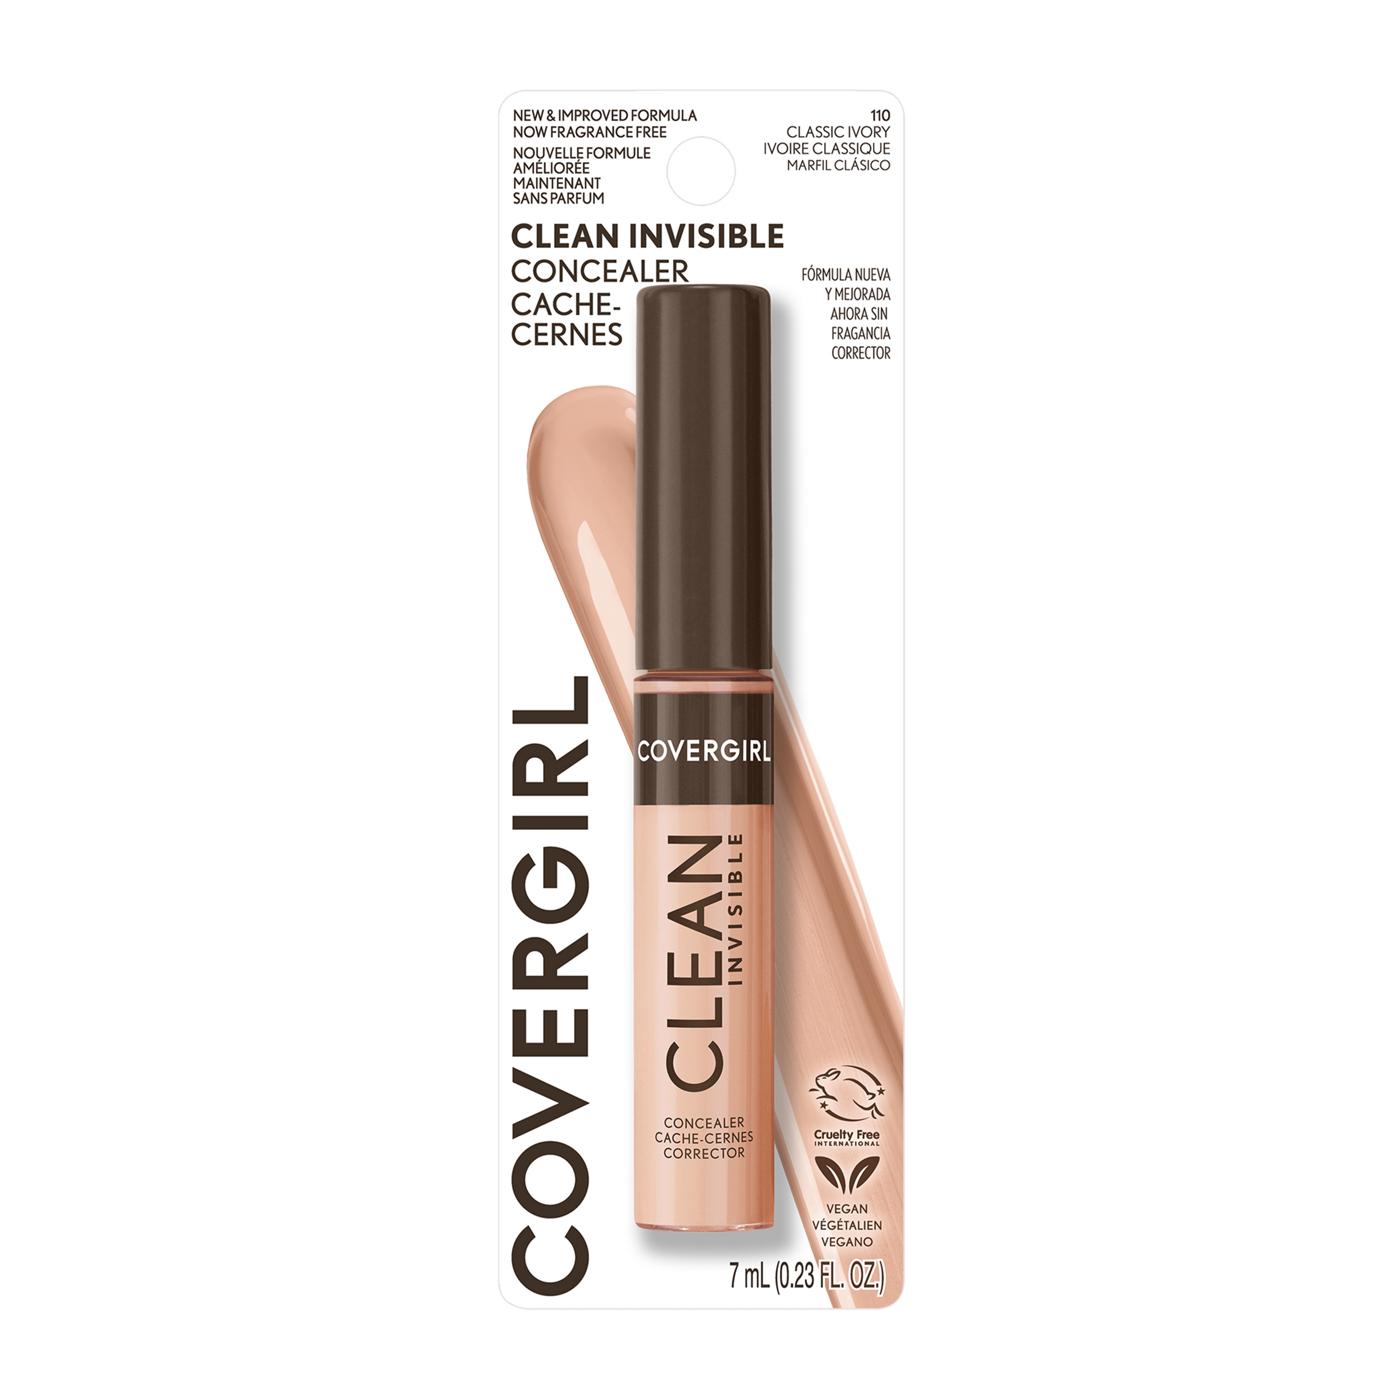 Covergirl Clean Invisible Concealer - Classic Ivory; image 1 of 15